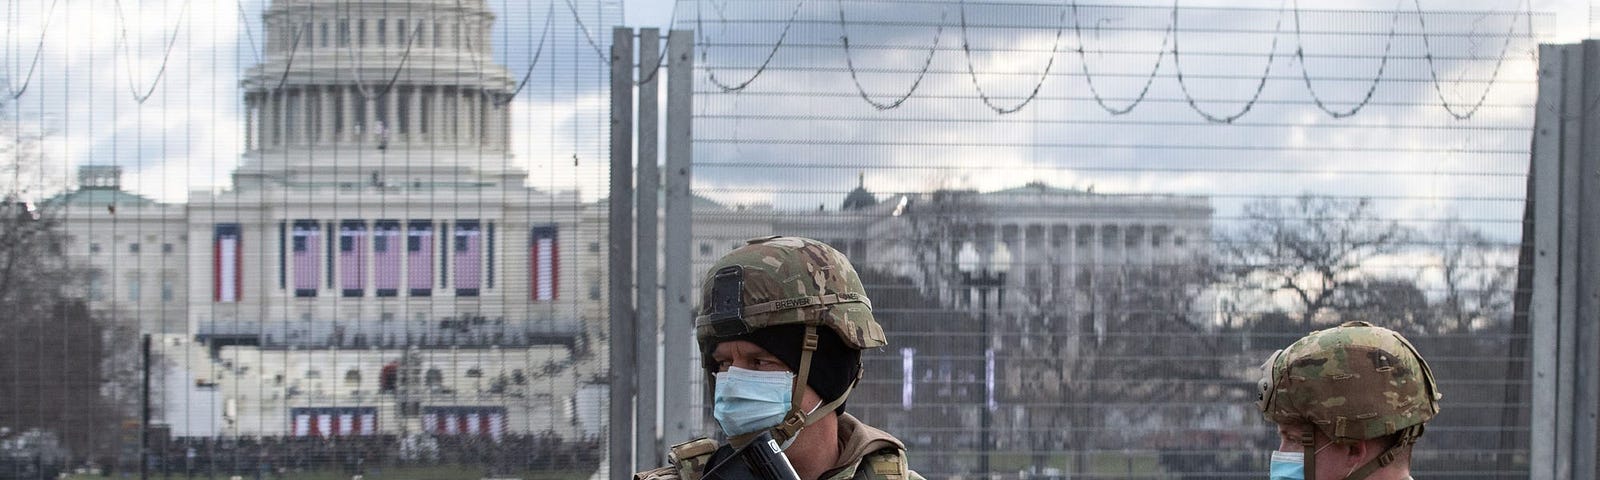 US National Guard troops patrol the vicinity of the US Capitol hours before the Inauguration of US President-Elect Joe Biden.